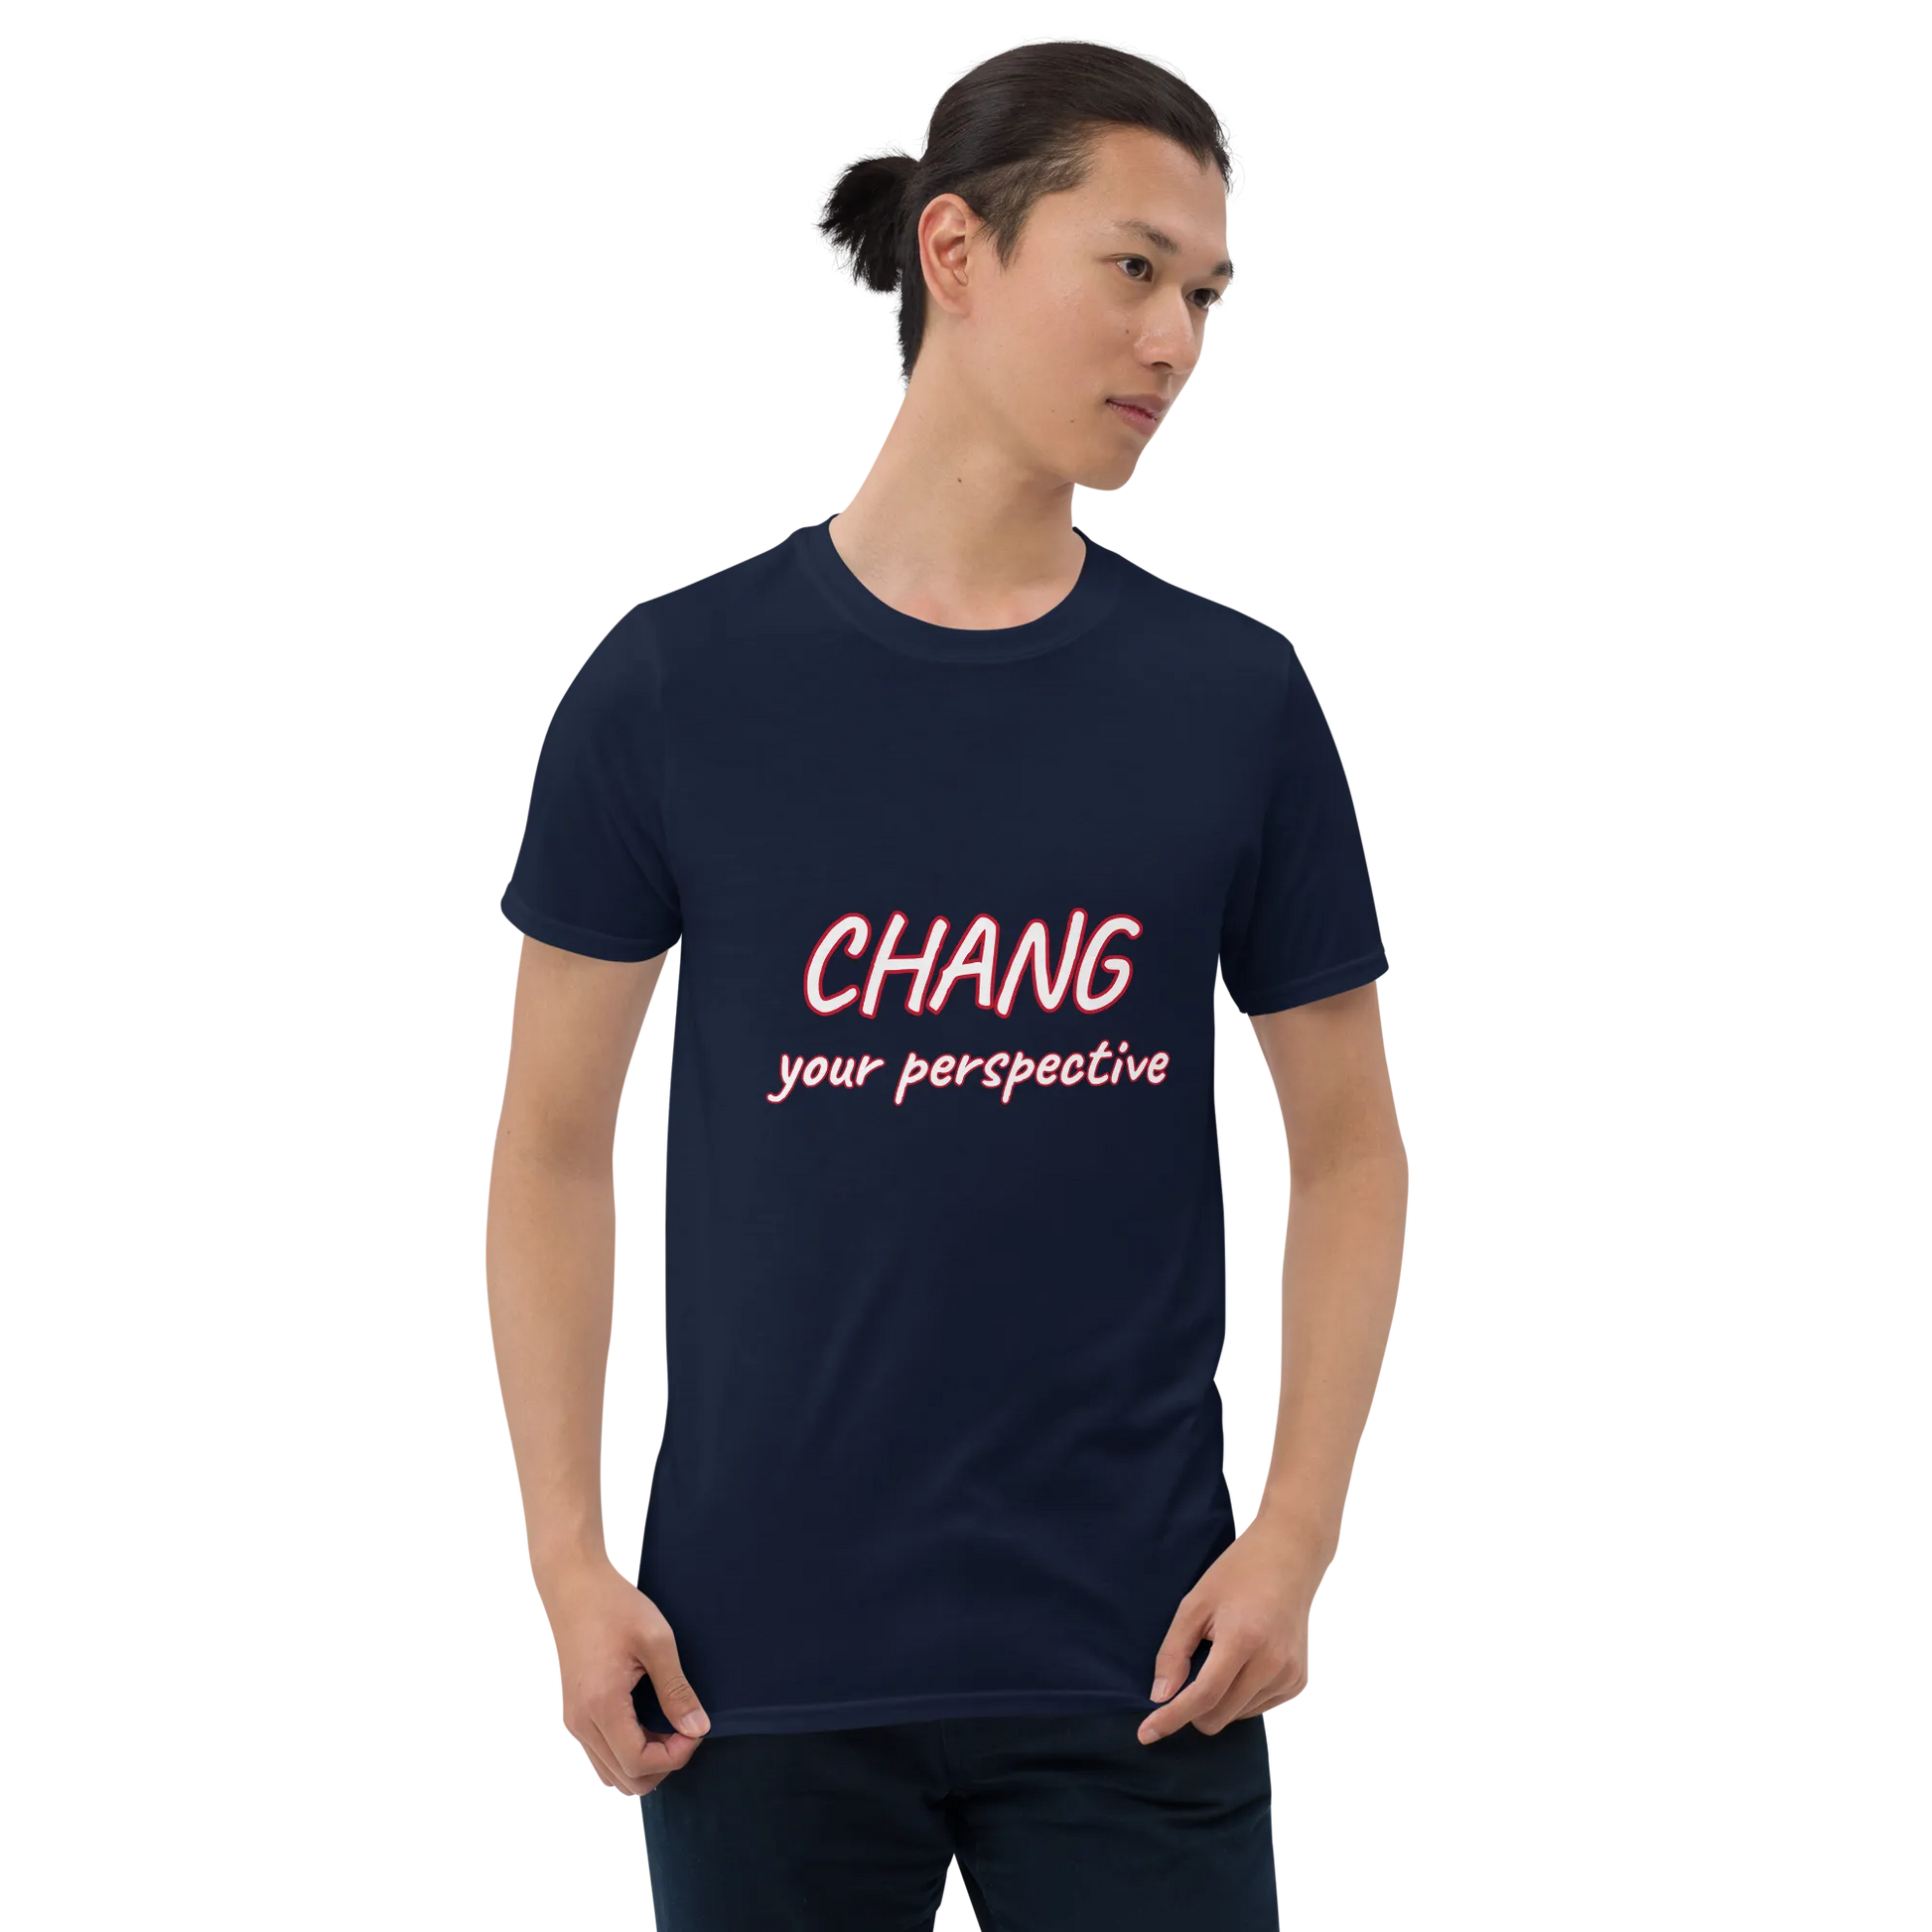 Chang Your Perspective Tee in Navy on man